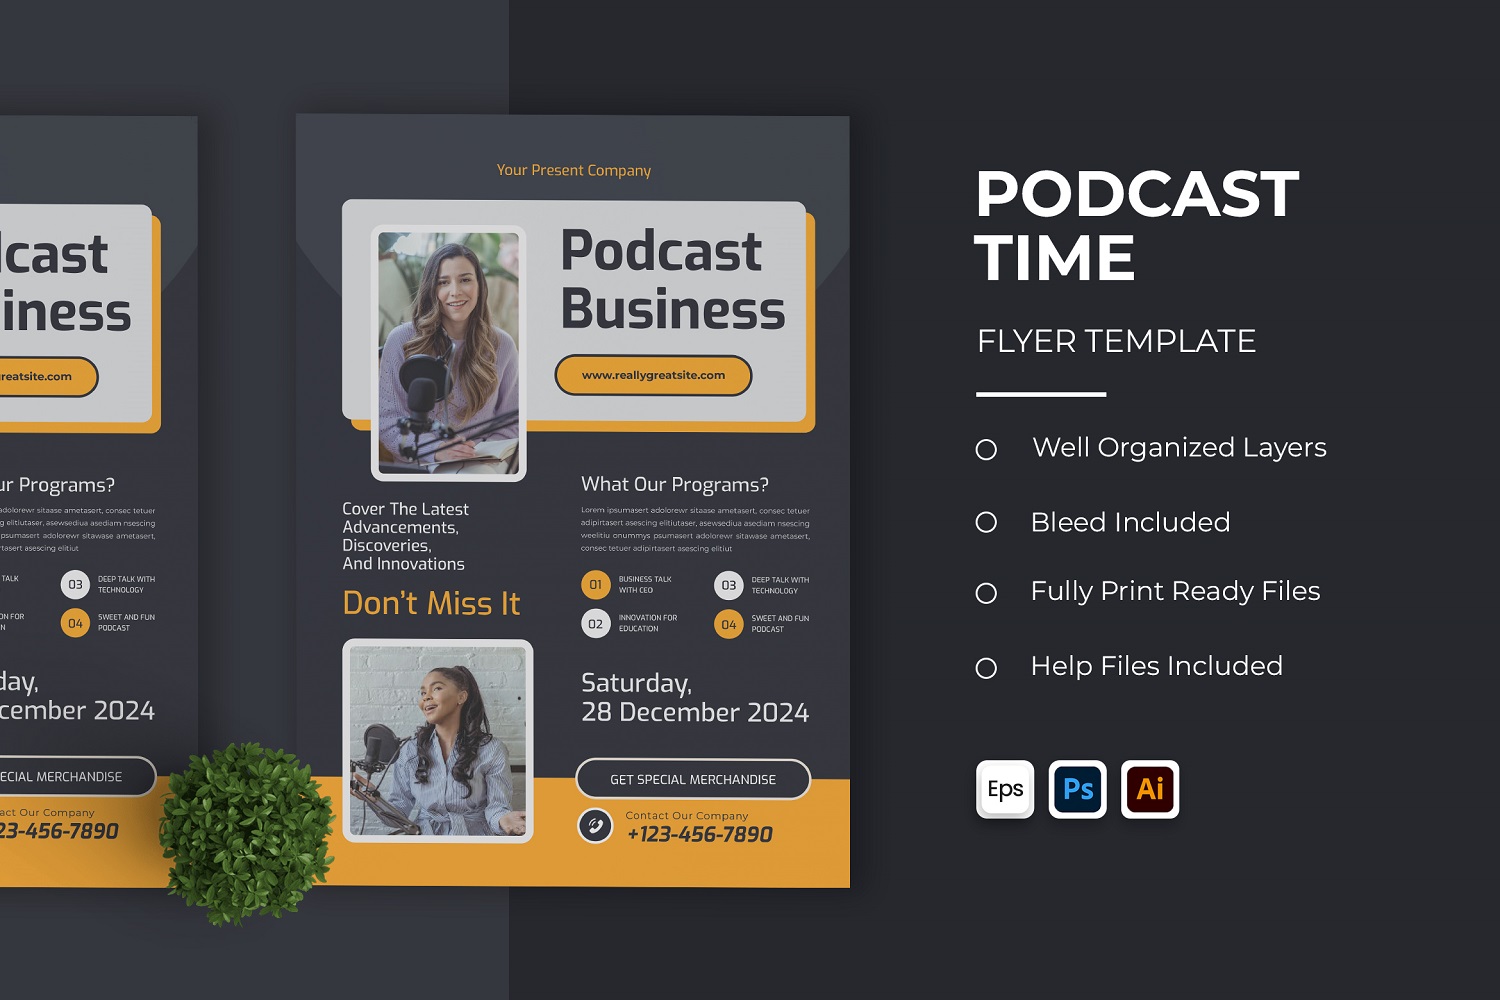 Podcast Time Flyer Template